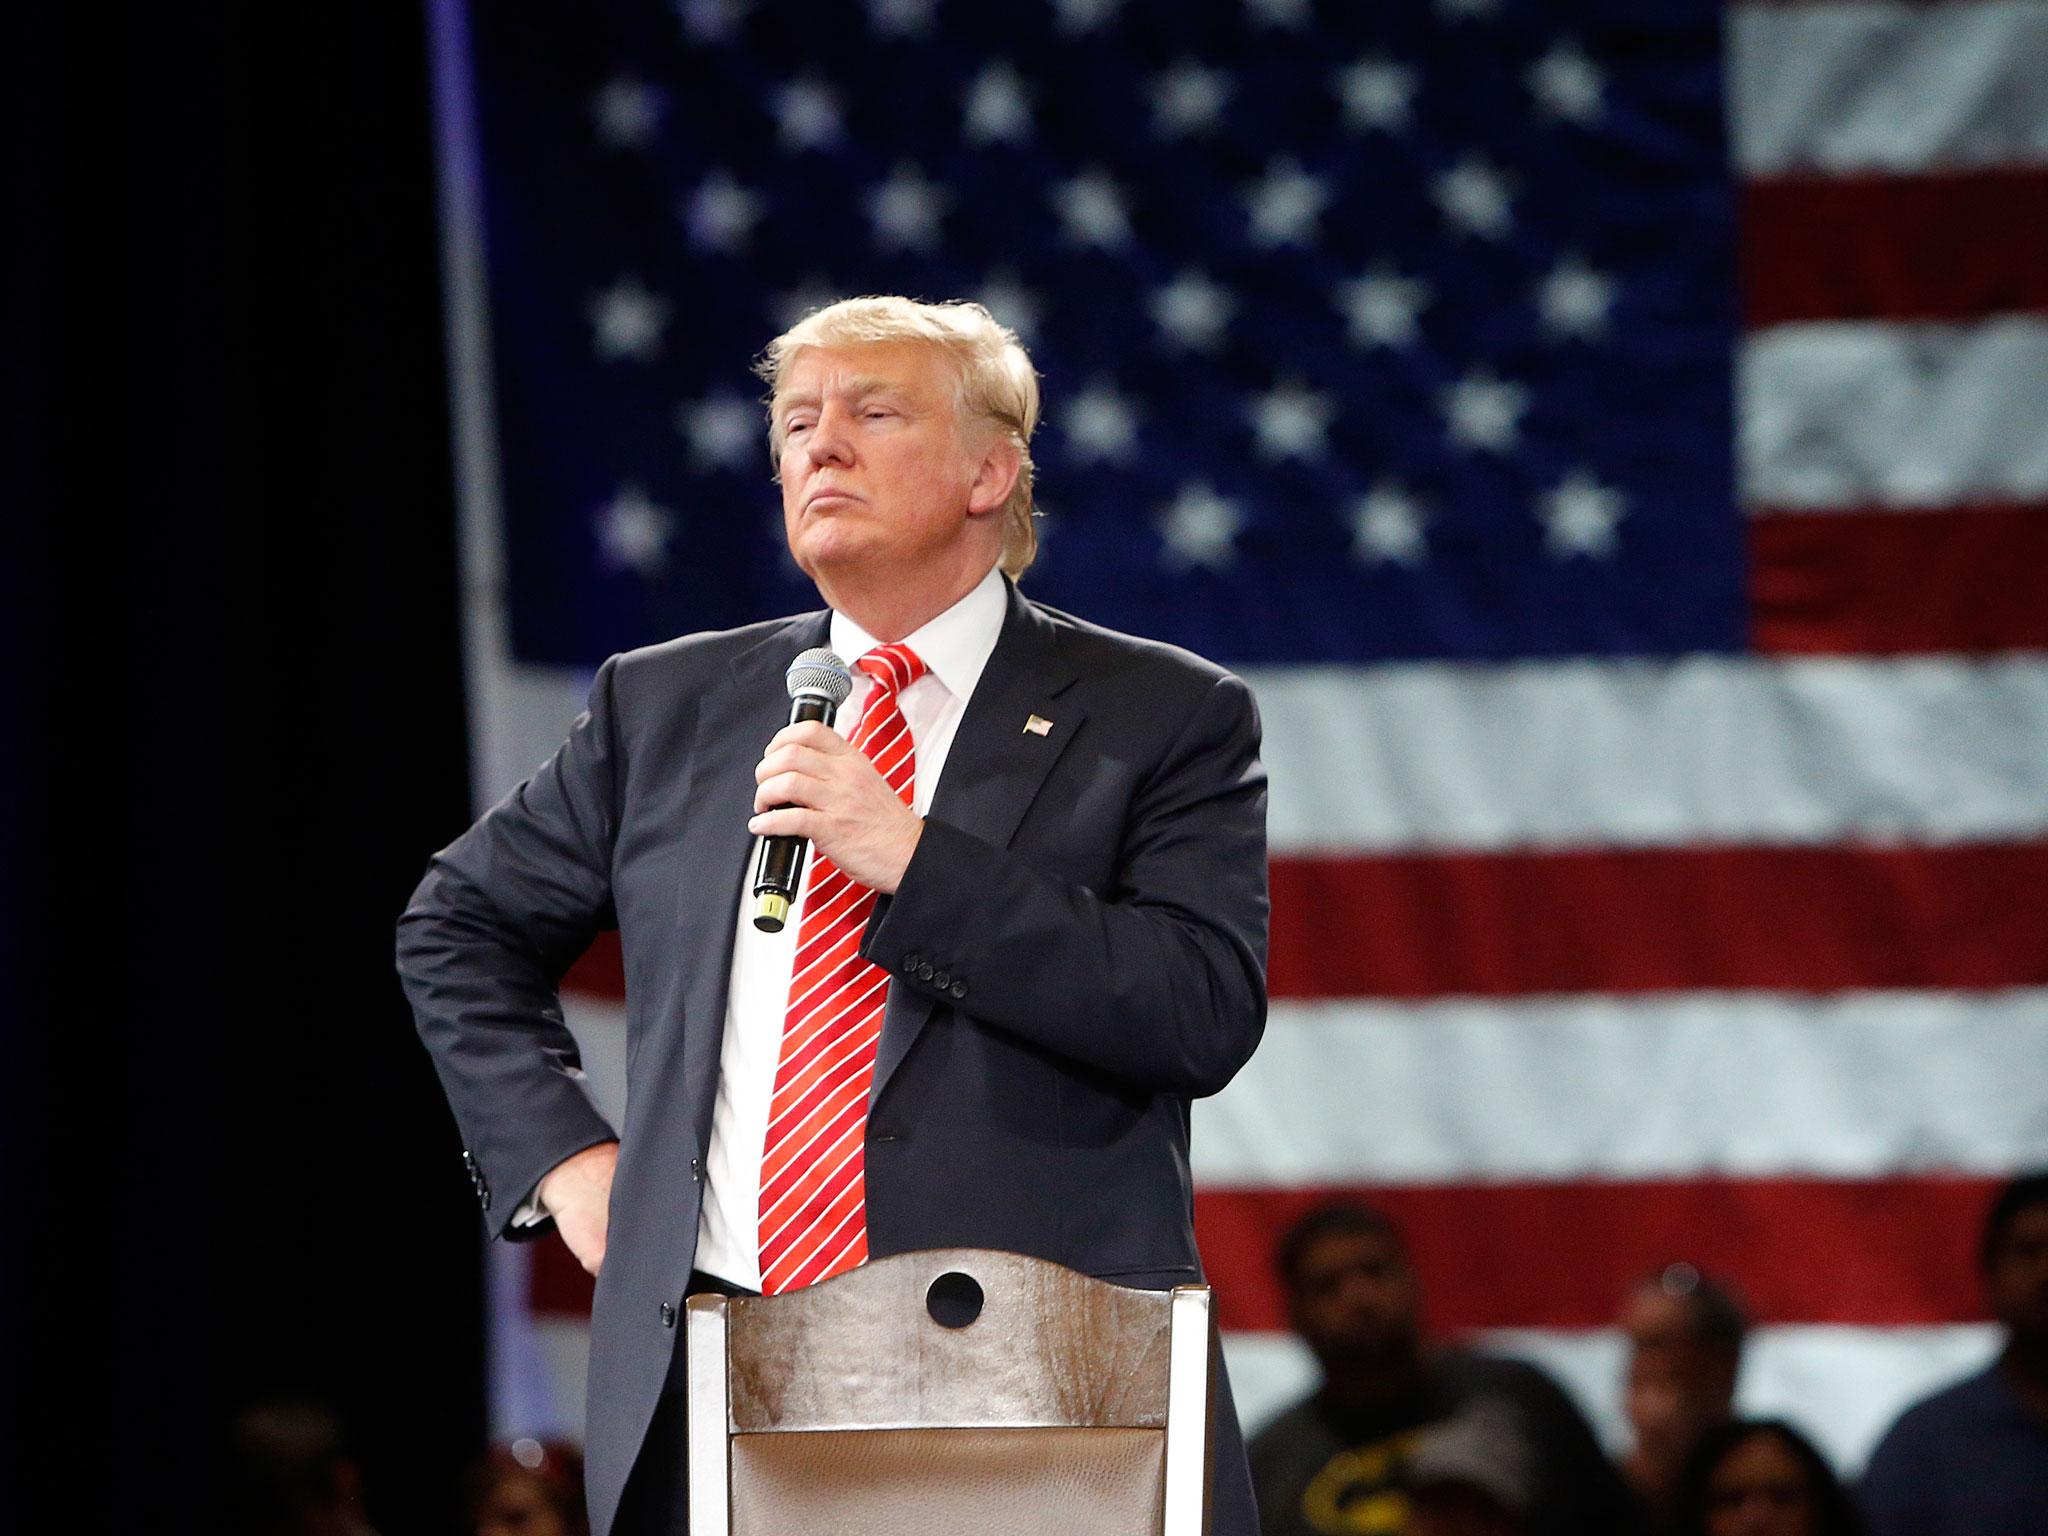 Donald Trump claims he can still win following another twist in the Clinton emails saga